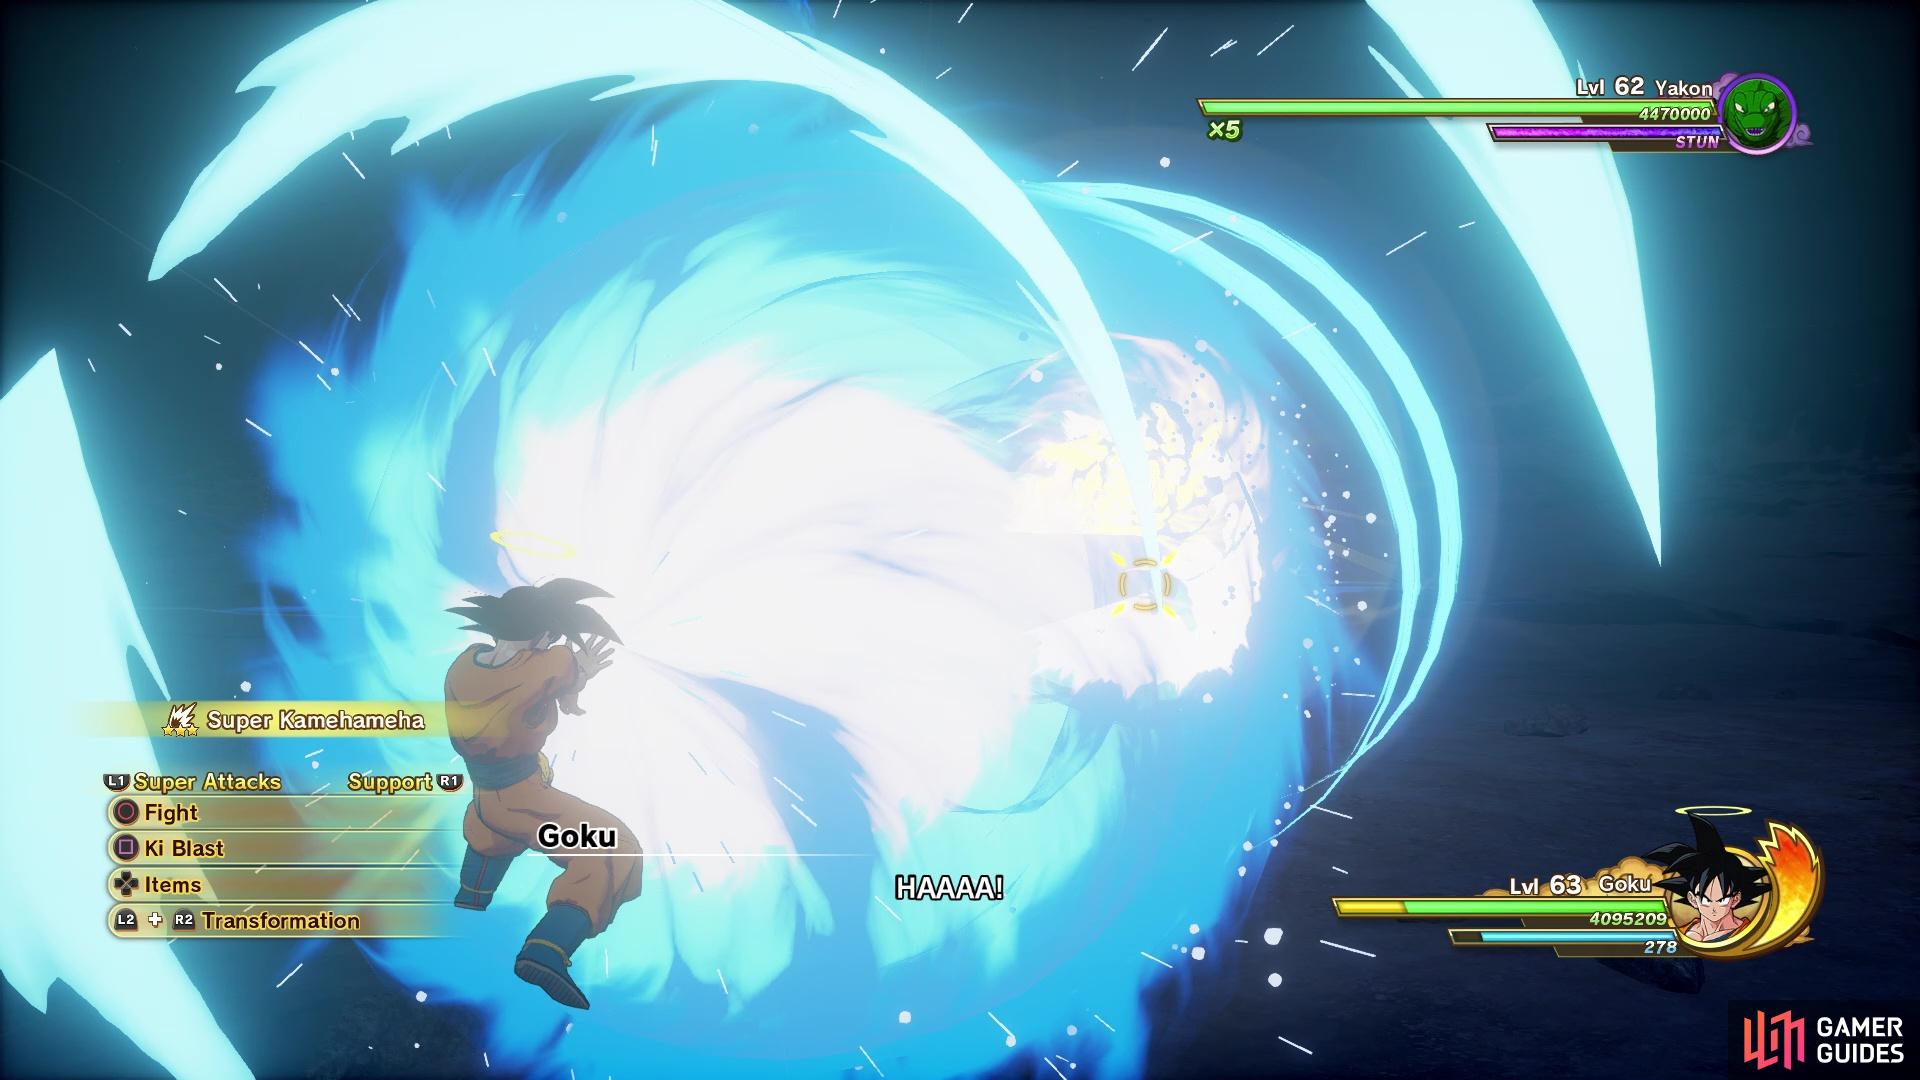 Yakon does have the ability to absorb Ki attacks, but it's completely random